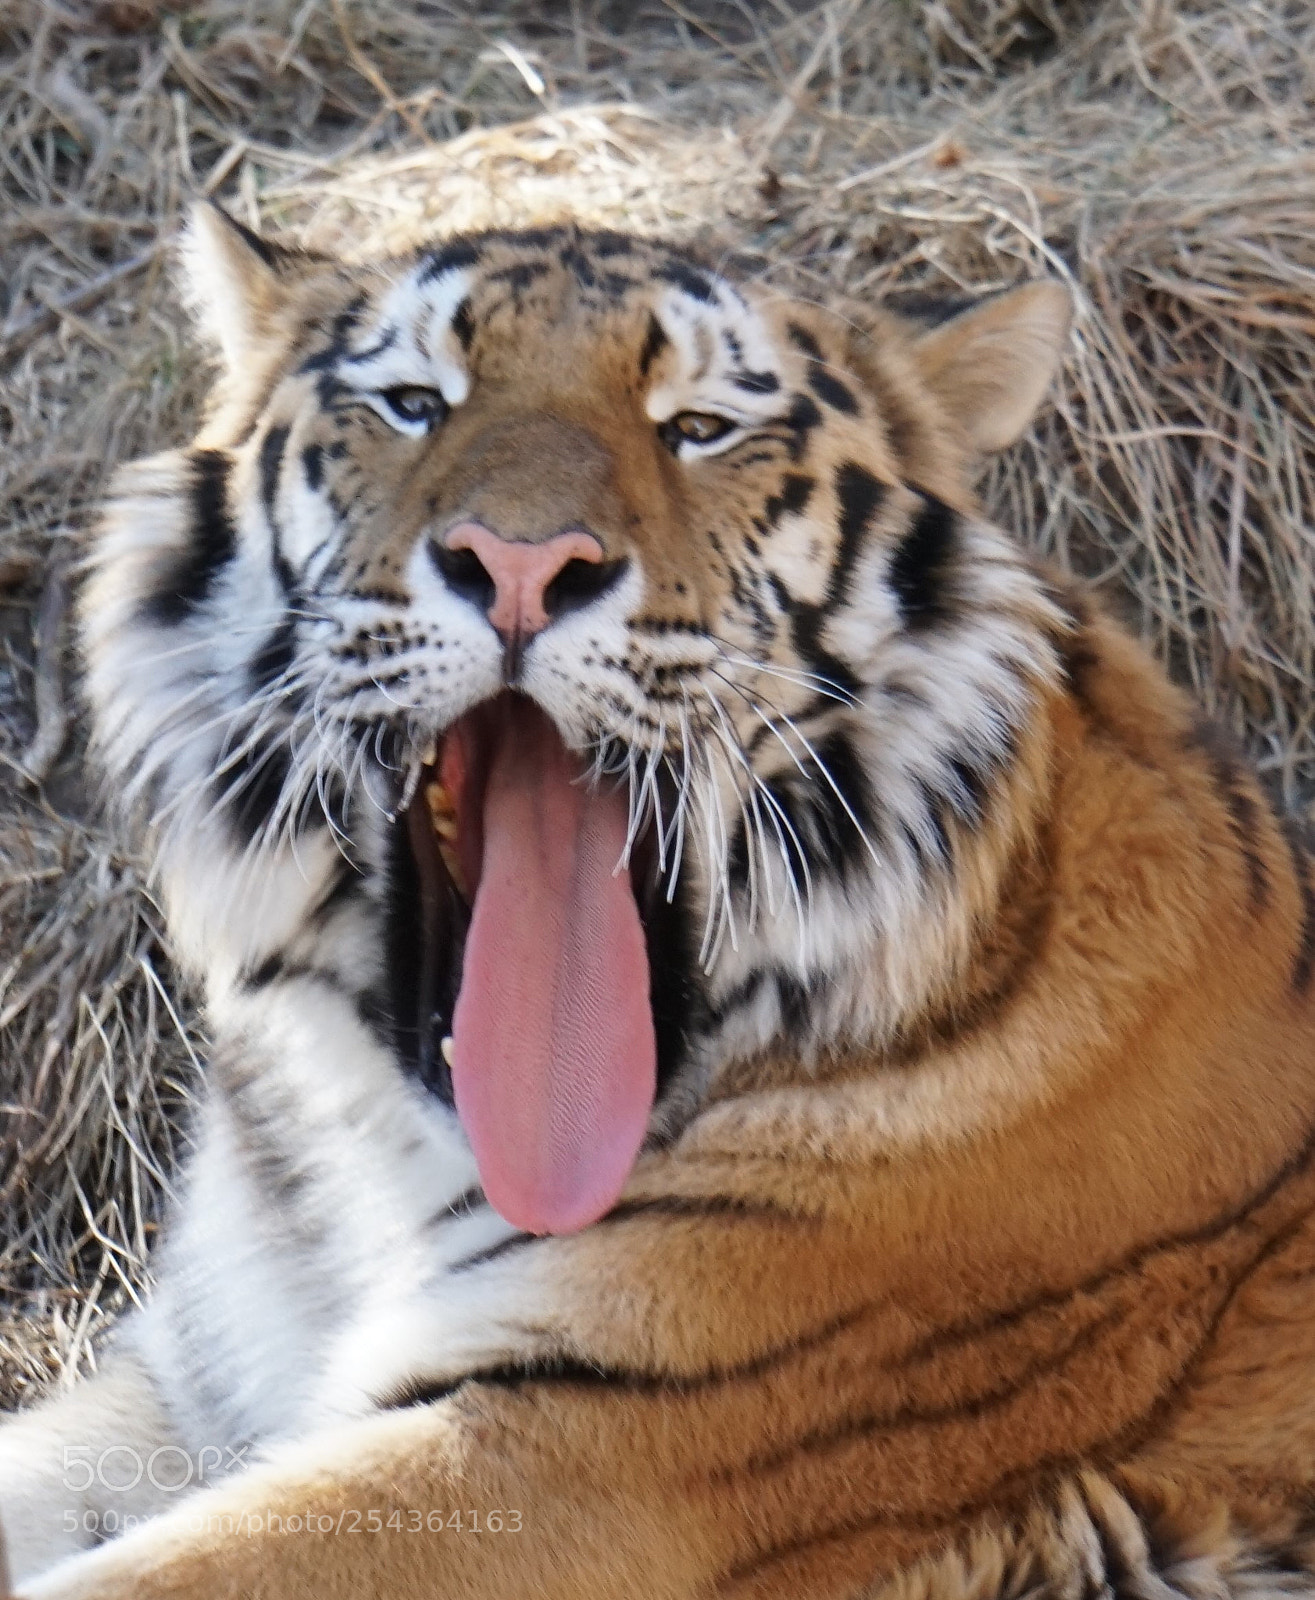 Sony a6300 sample photo. Tiger yawn photography